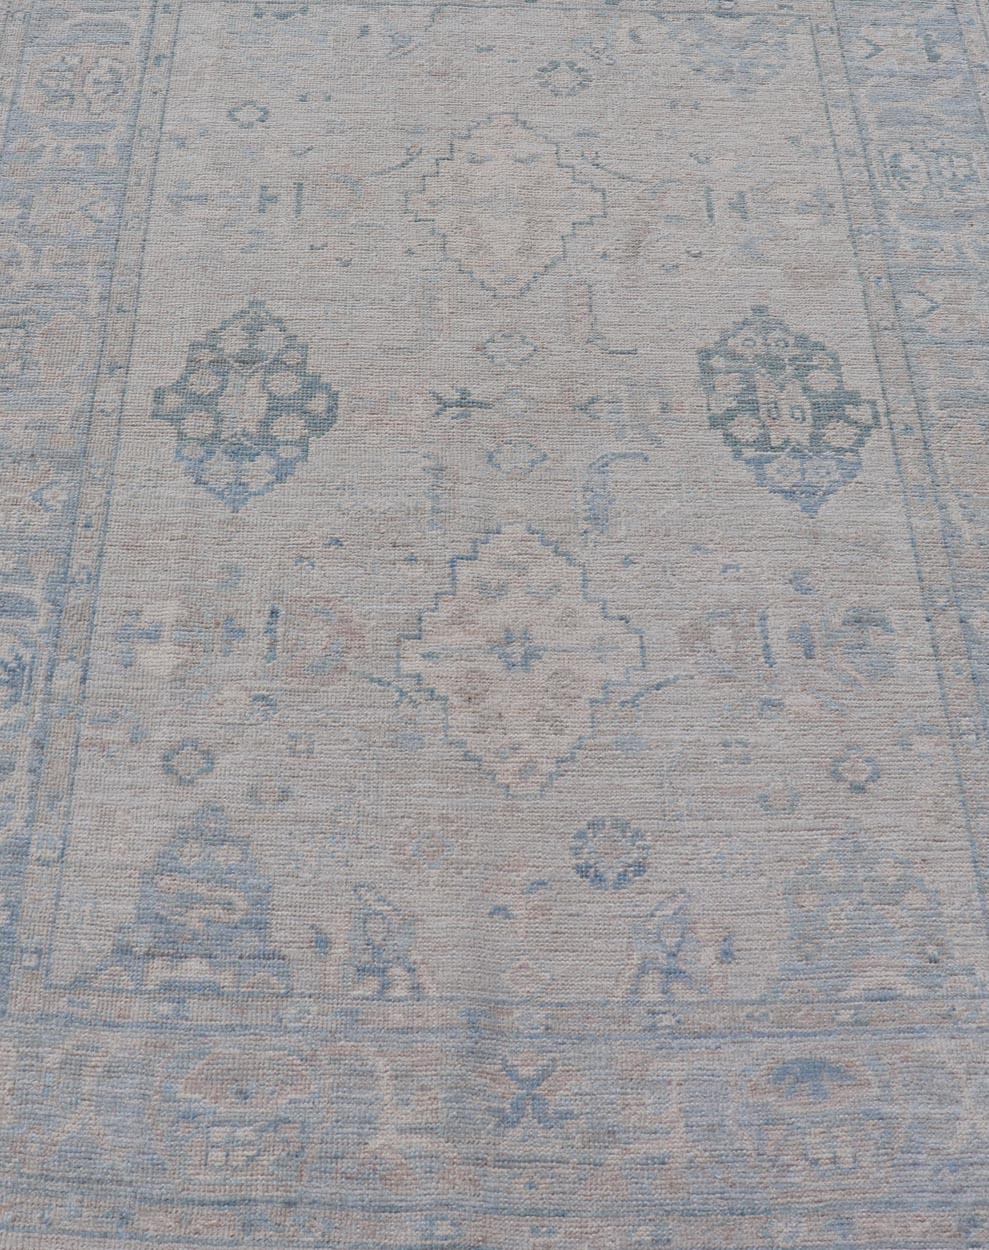 Hand-Knotted Oushak with a light blue background and tribal motifs. Keivan Woven Arts; rug AWR-10729 Country of Origin: Afghanistan Type: Oushak Design: Floral, All-Over Abstract-Tribal 
Measures: 4'0 x 5'4 
This Oushak presents centered motif